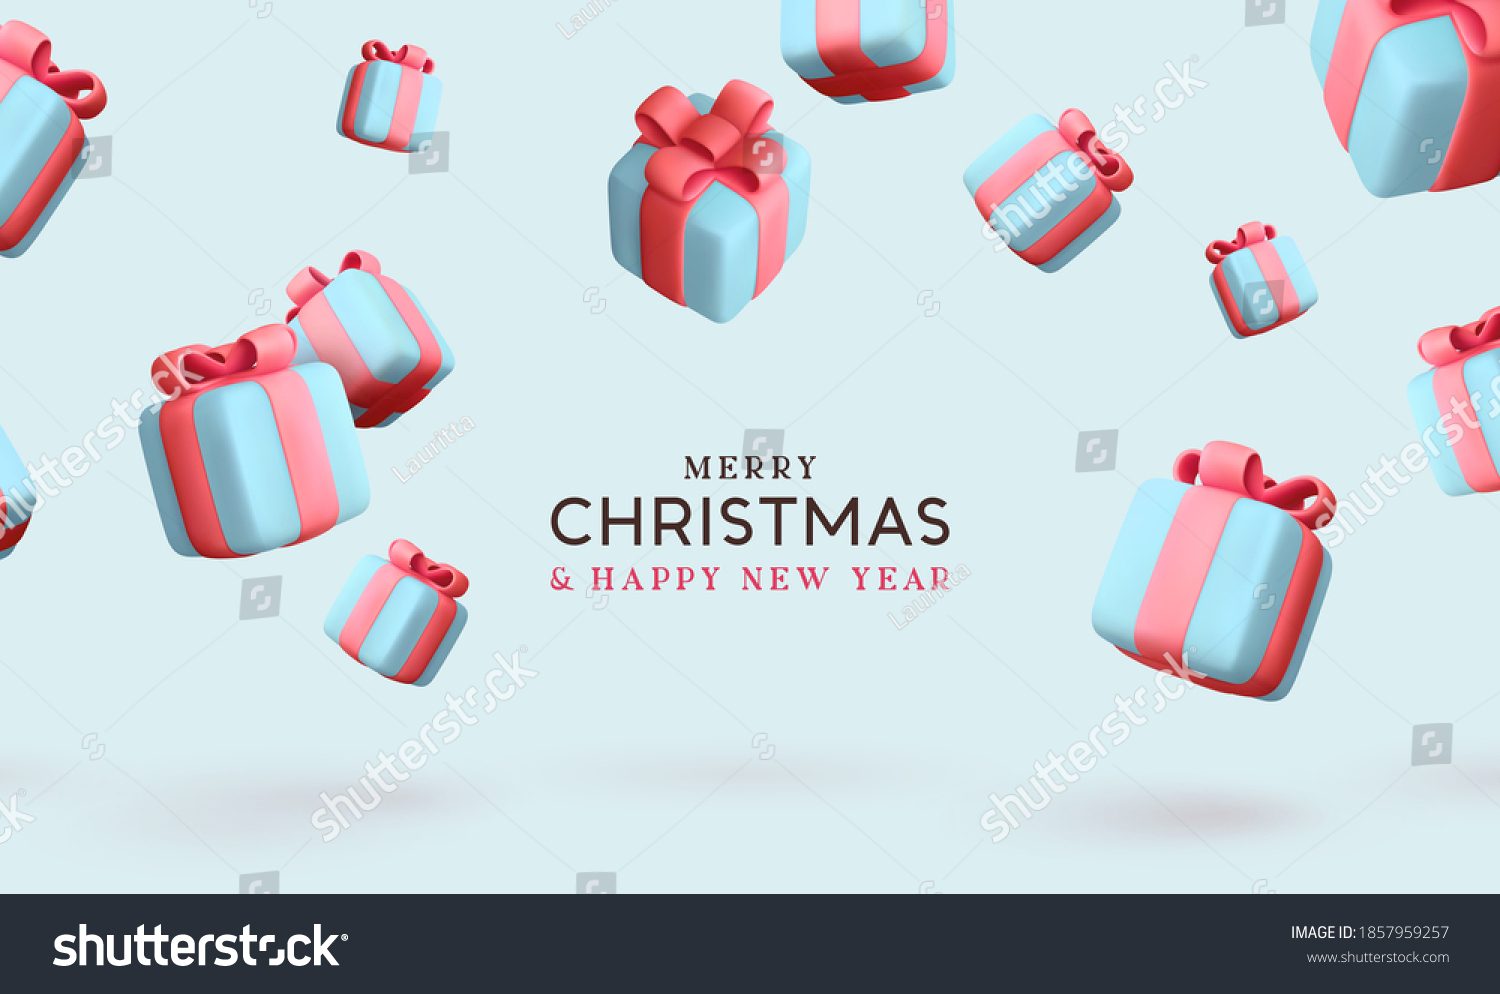 Merry Christmas and Happy New Year. Background with realistic festive gifts box. Xmas present. Blue boxes fall effect. Holiday gift surprise banner, web poster, flyer, stylish brochure, greeting card #1857959257